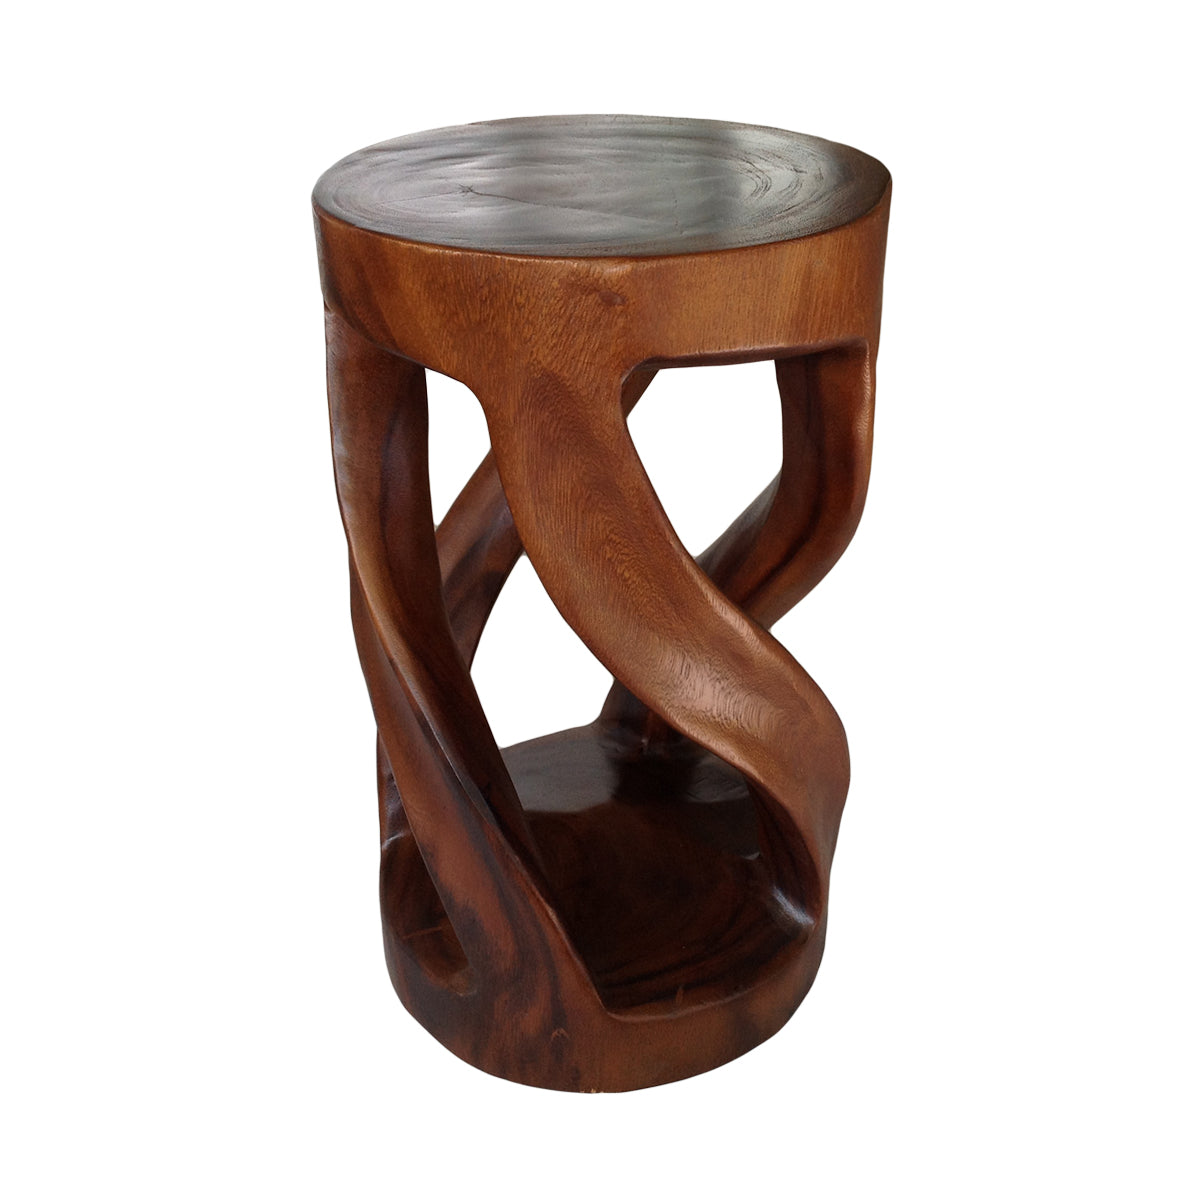 Wood Side Table - Round Top Stool - Vine Twist 20 inch - Caramel Brown